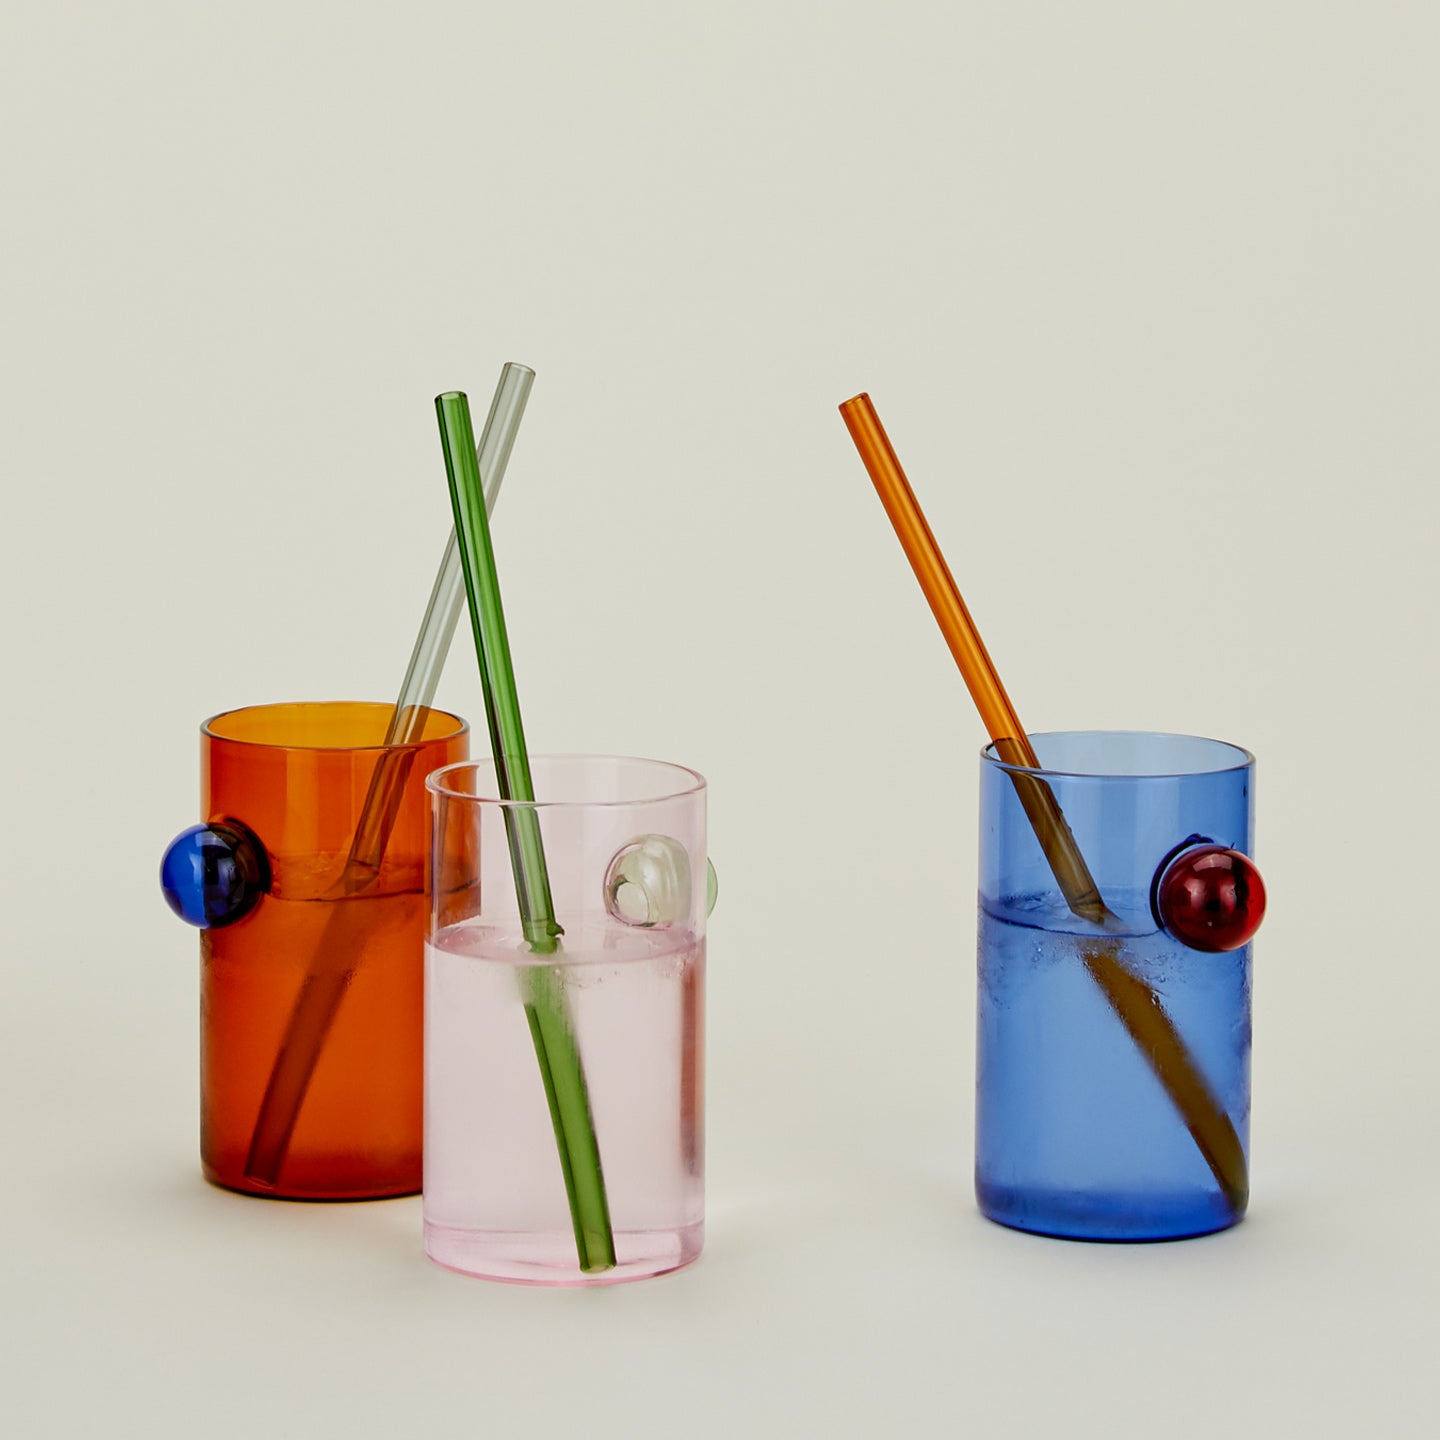 Group of Bubble Glasses in various colors.